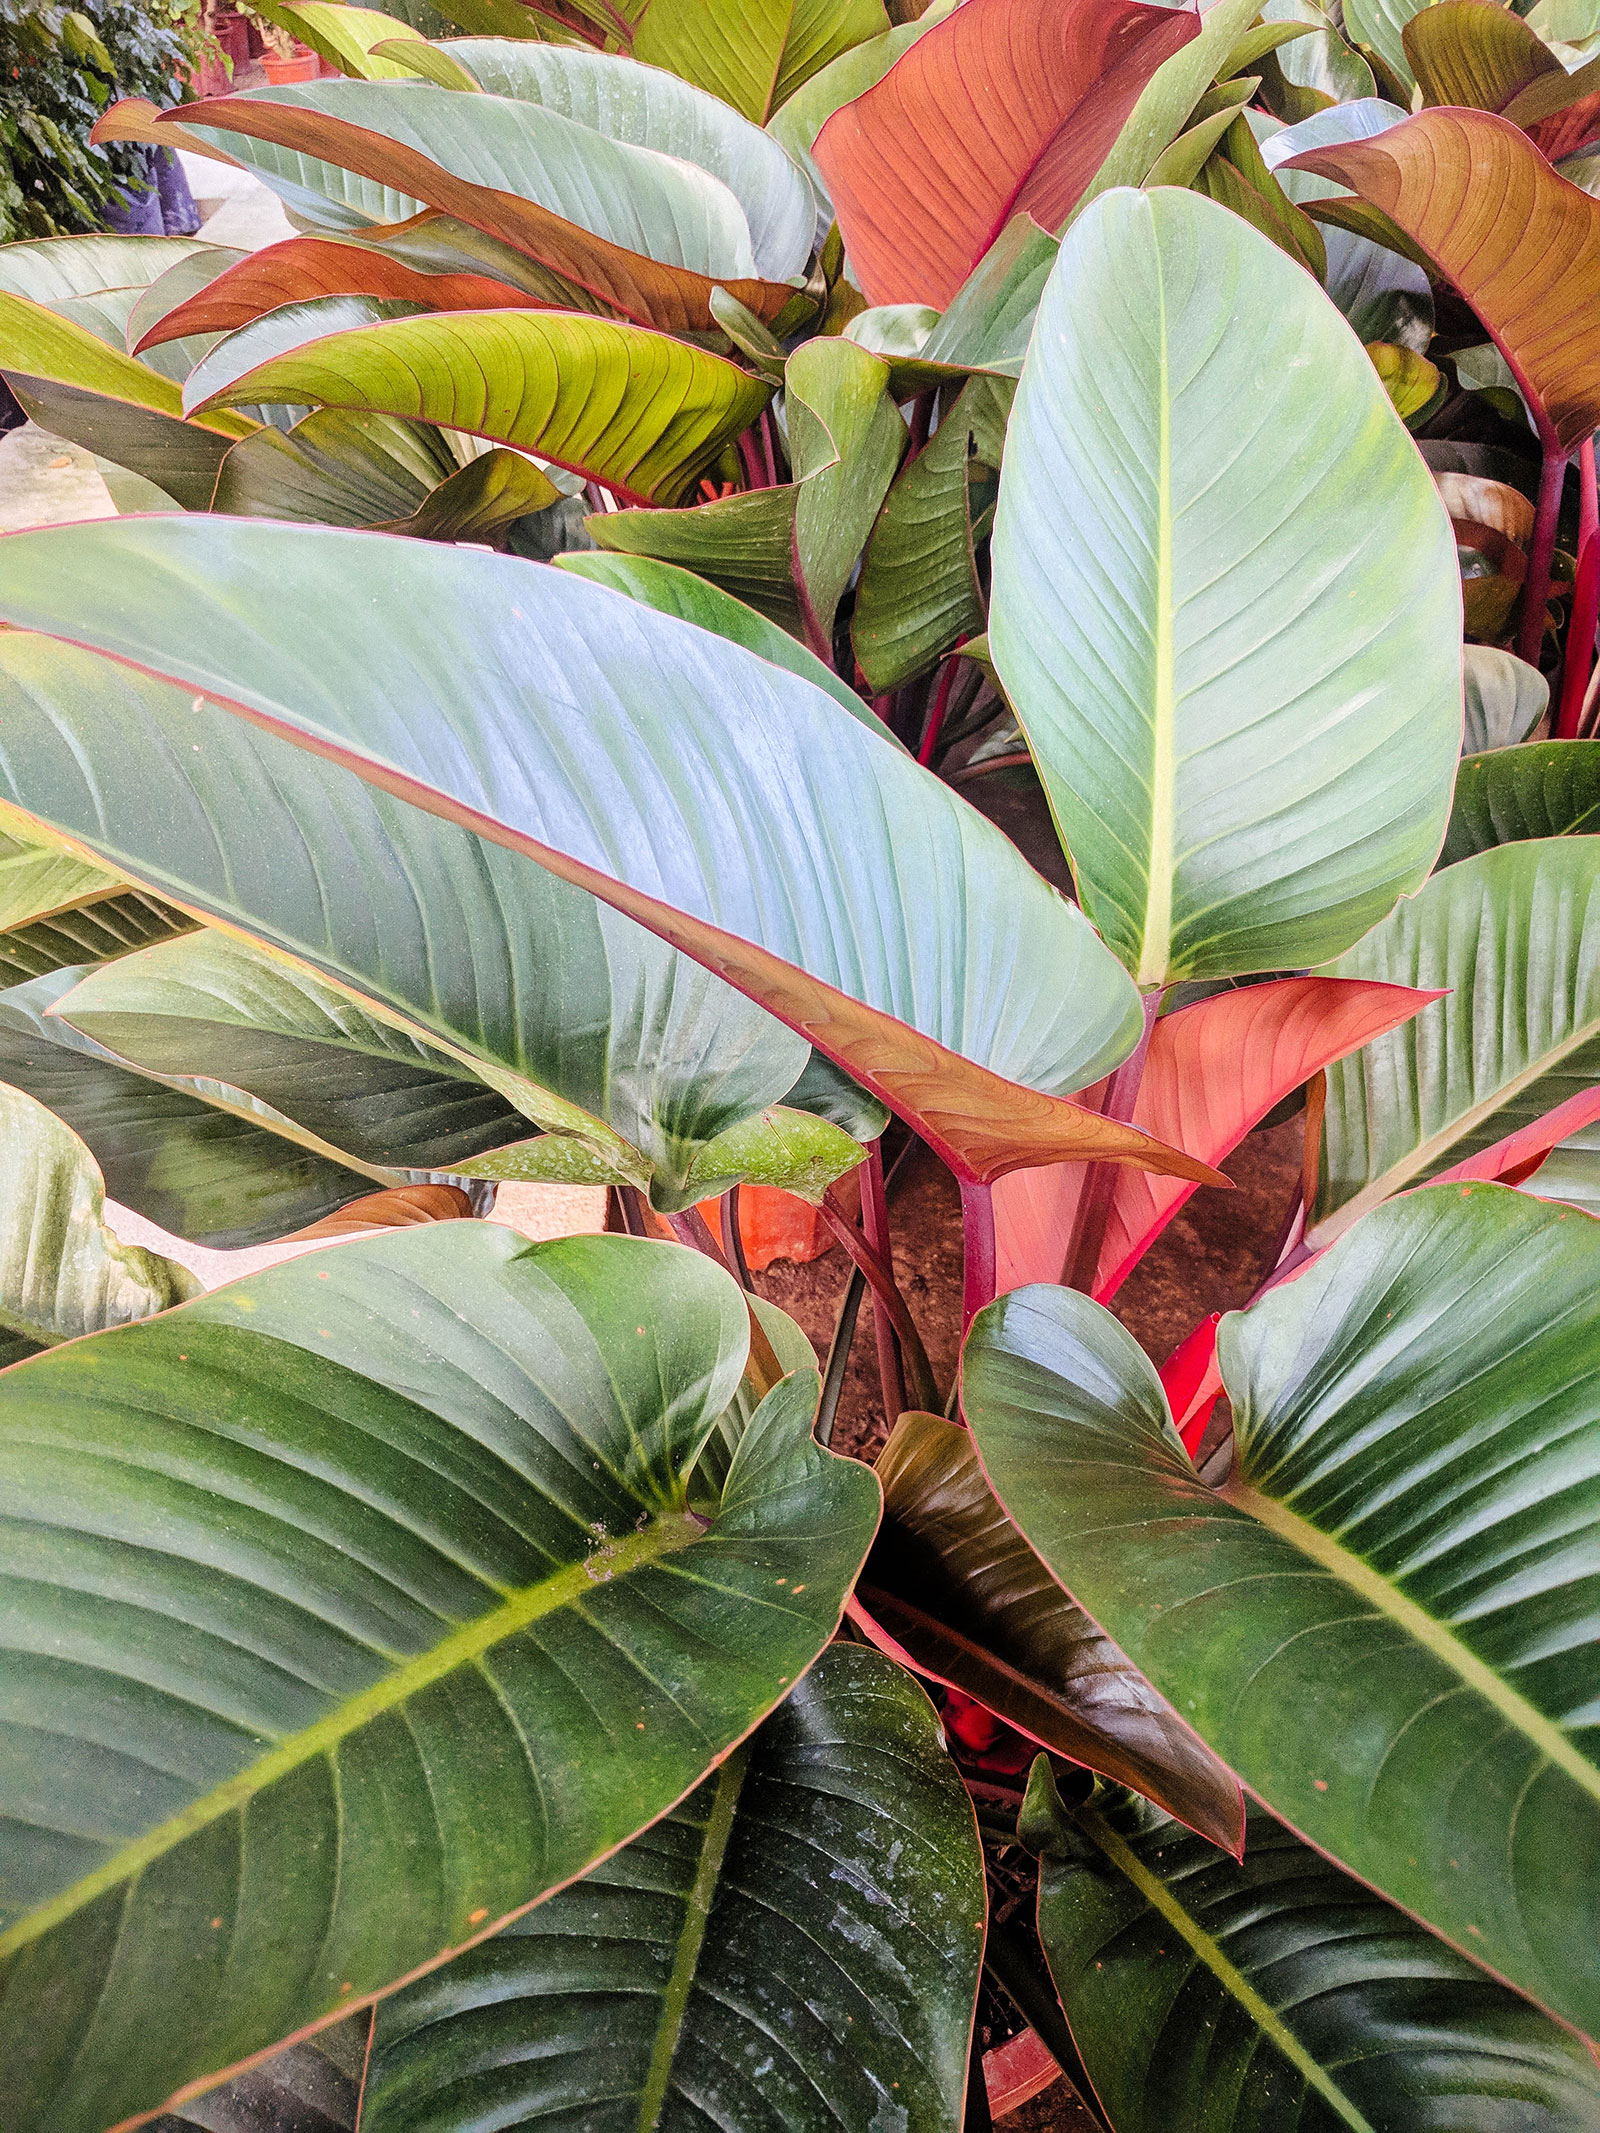 Philodendron 'Rojo Congo' plants clustered together